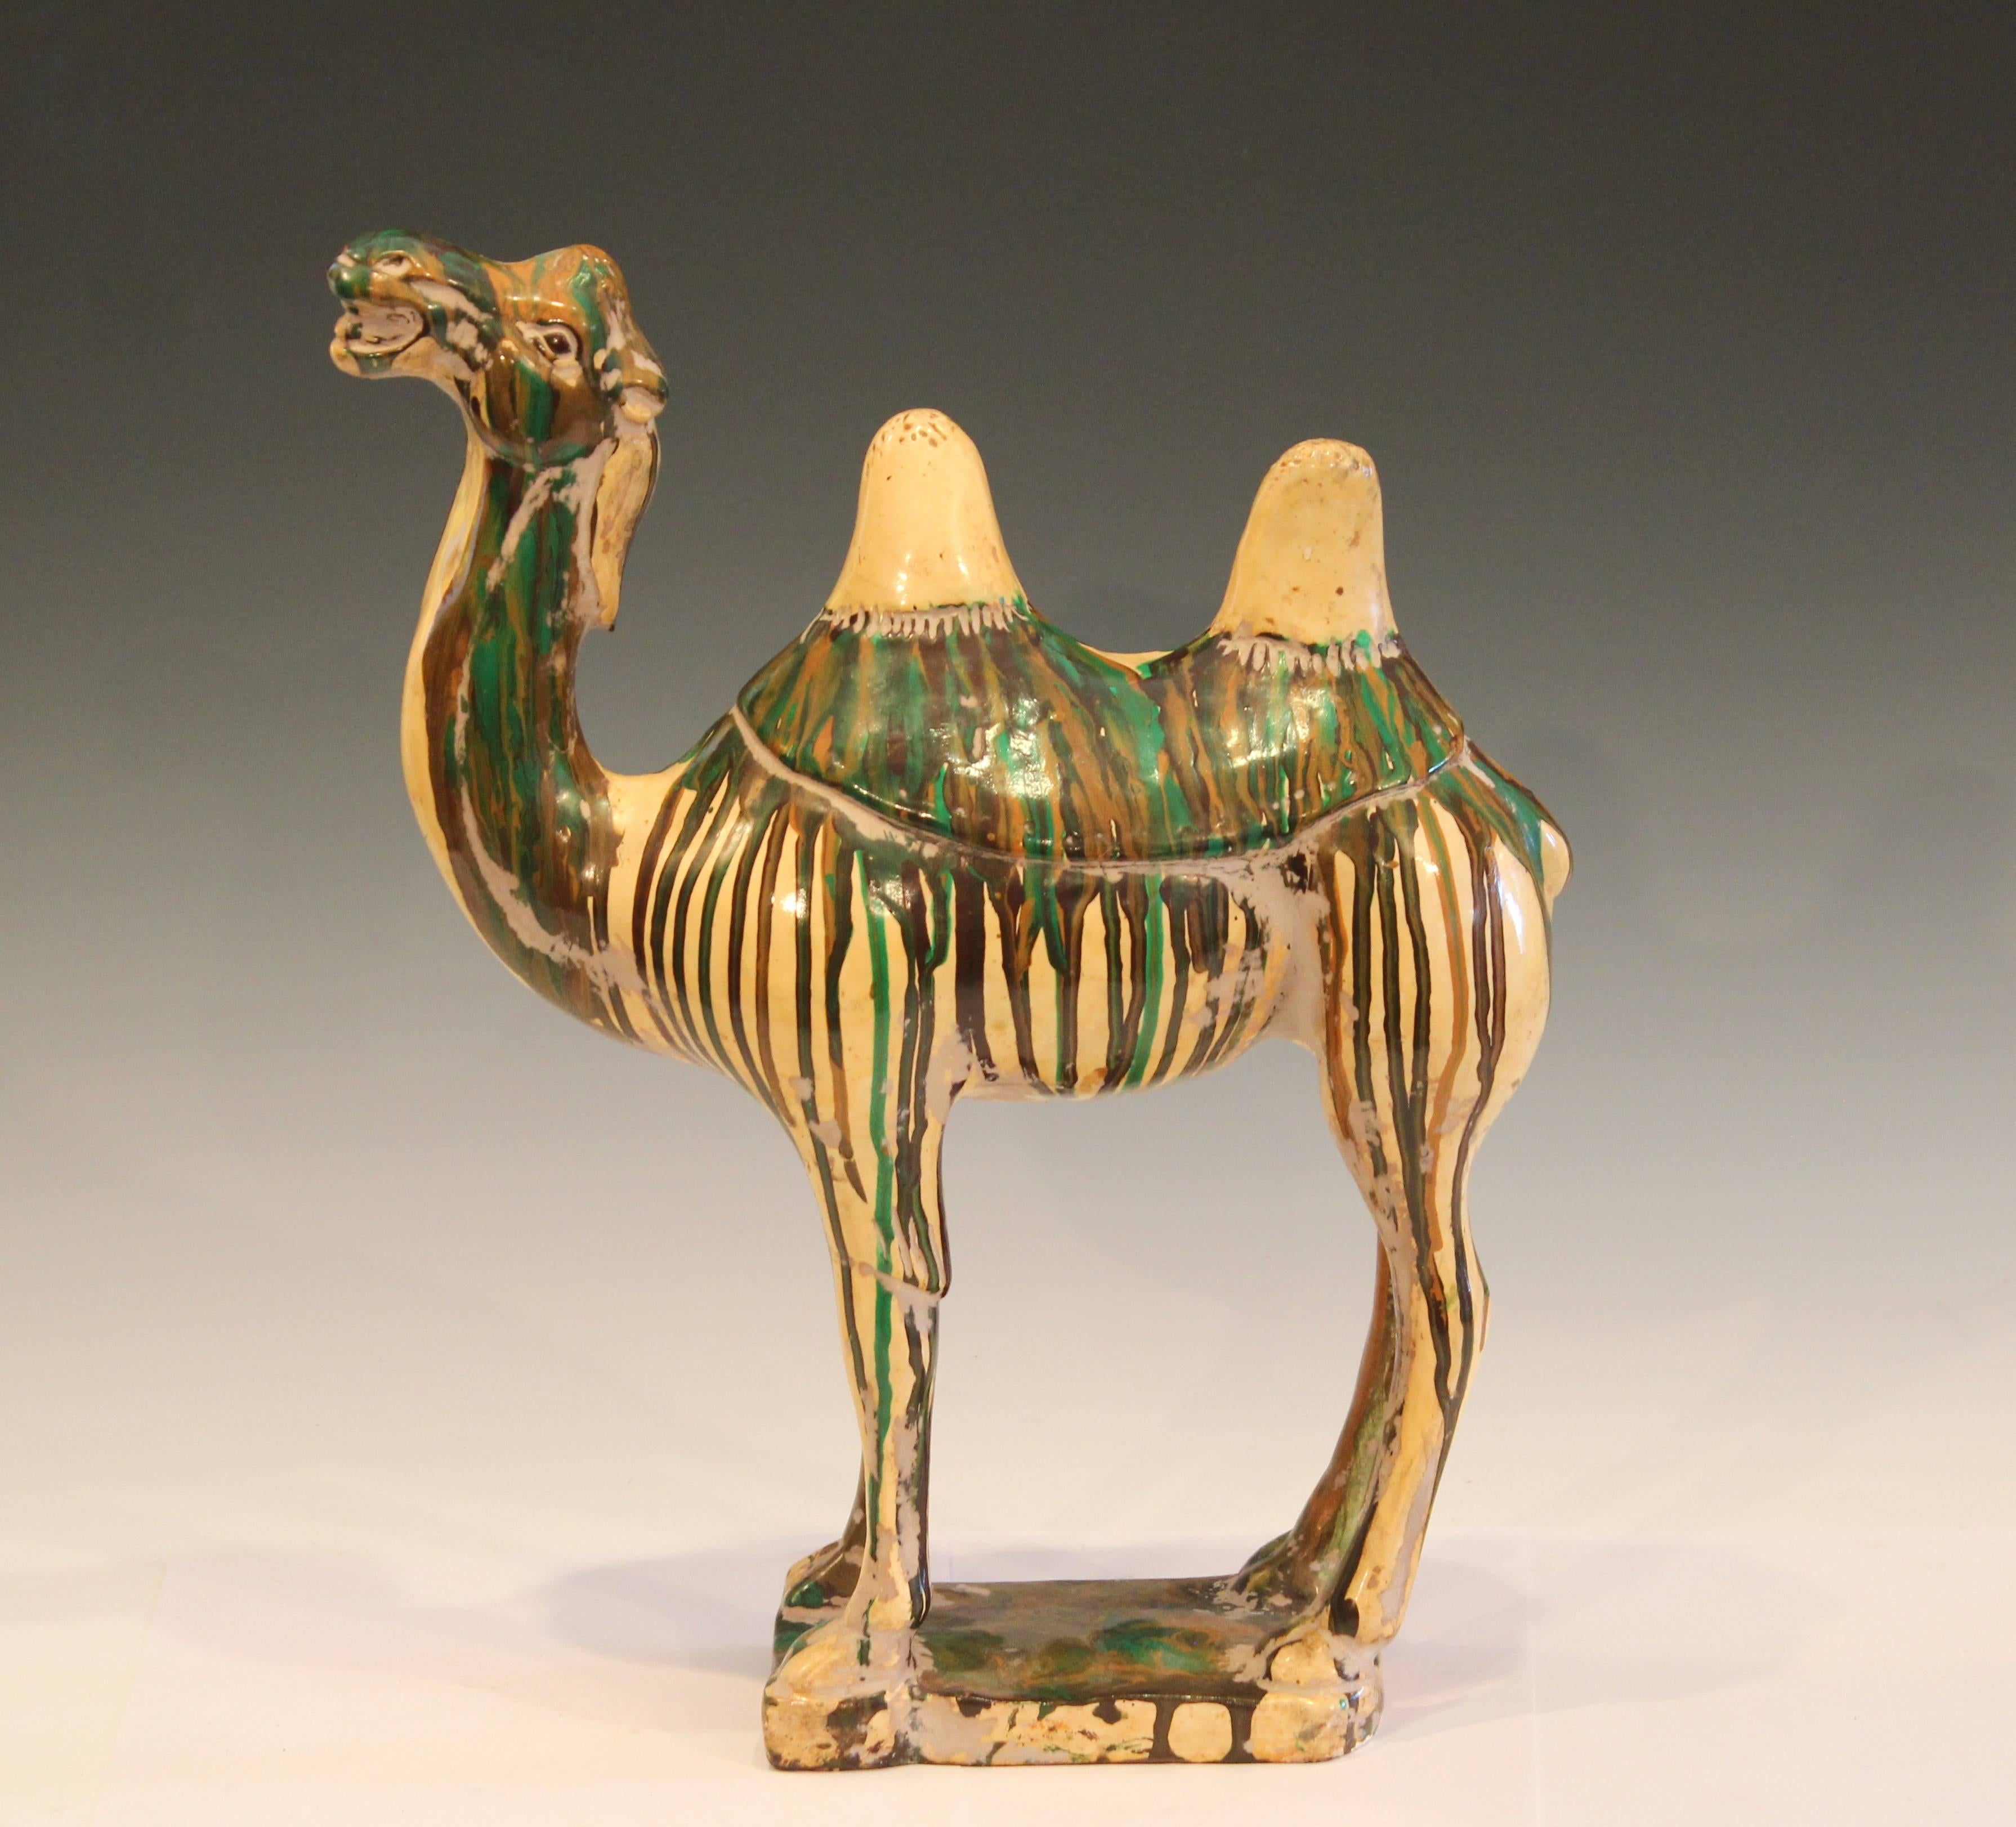 Vintage Chinese Tang style double hump camel figure, circa mid-20th century. Chinese? Italian? Has a lively presence with smirking grin, humps and tail askew, and strong contrasting drip glaze with passages of marbleization. Measure: 15 1/2